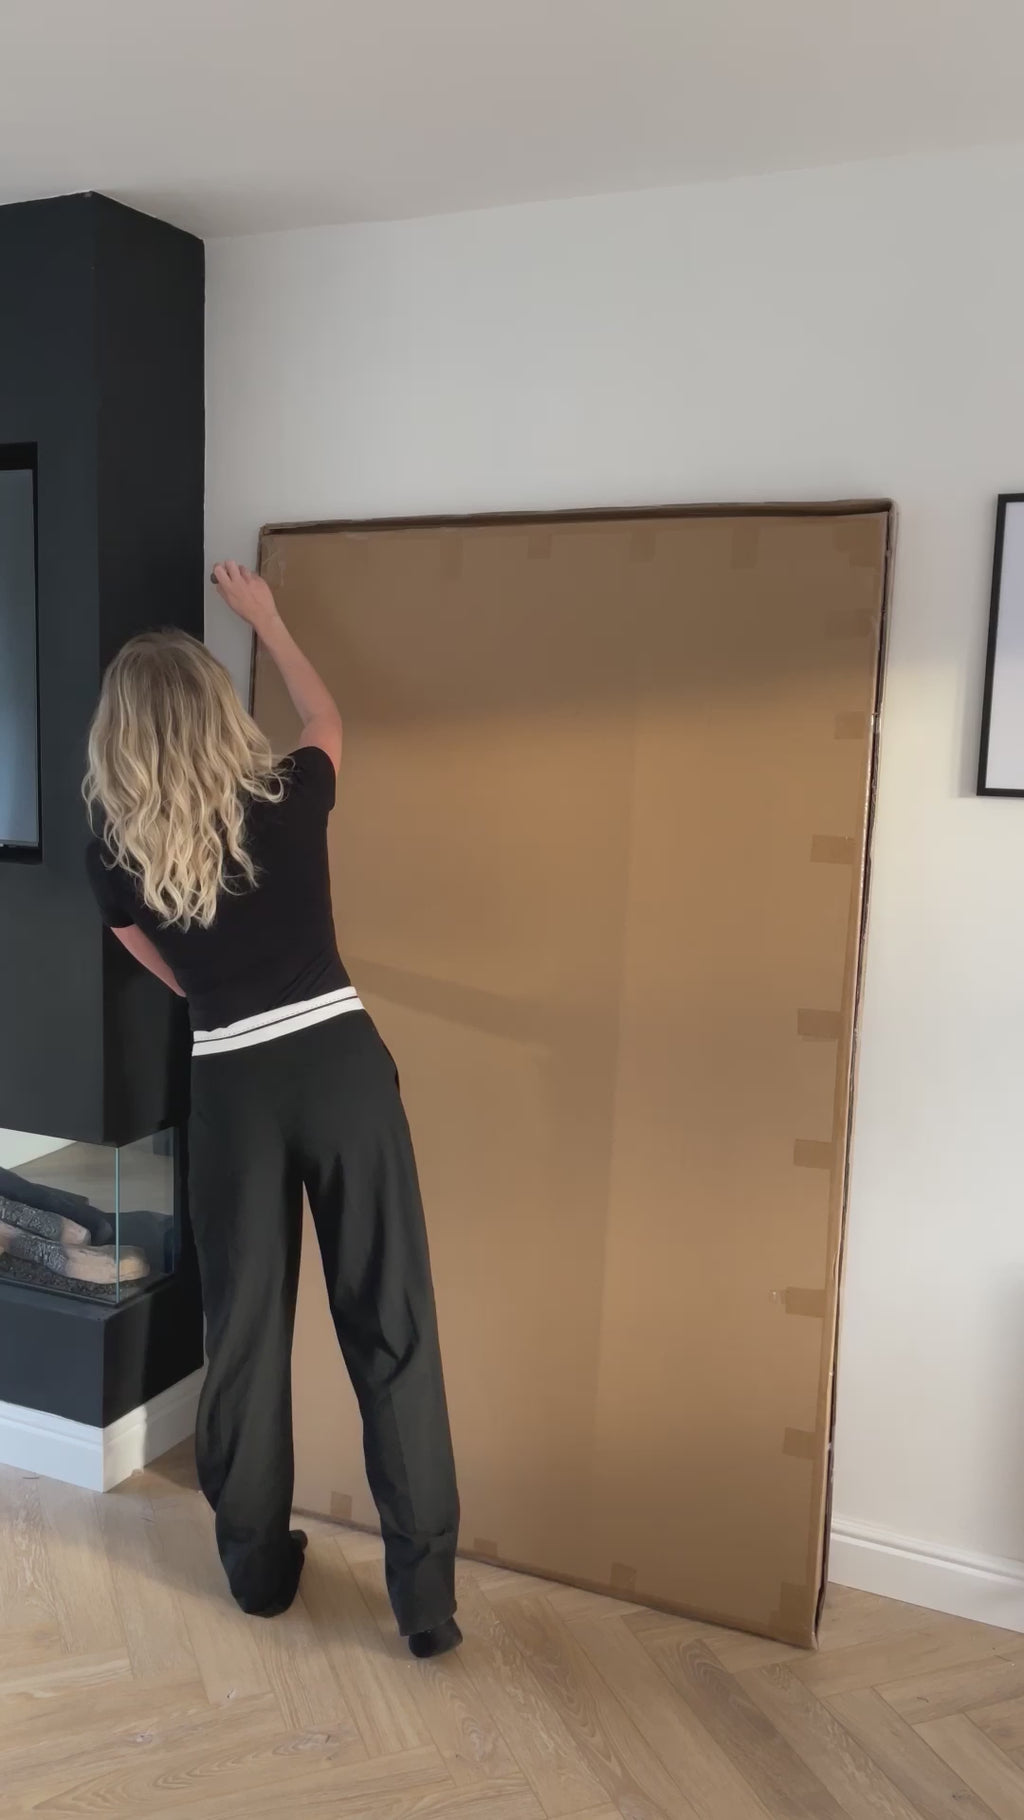 Extra large frameless arched full length mirror setup video